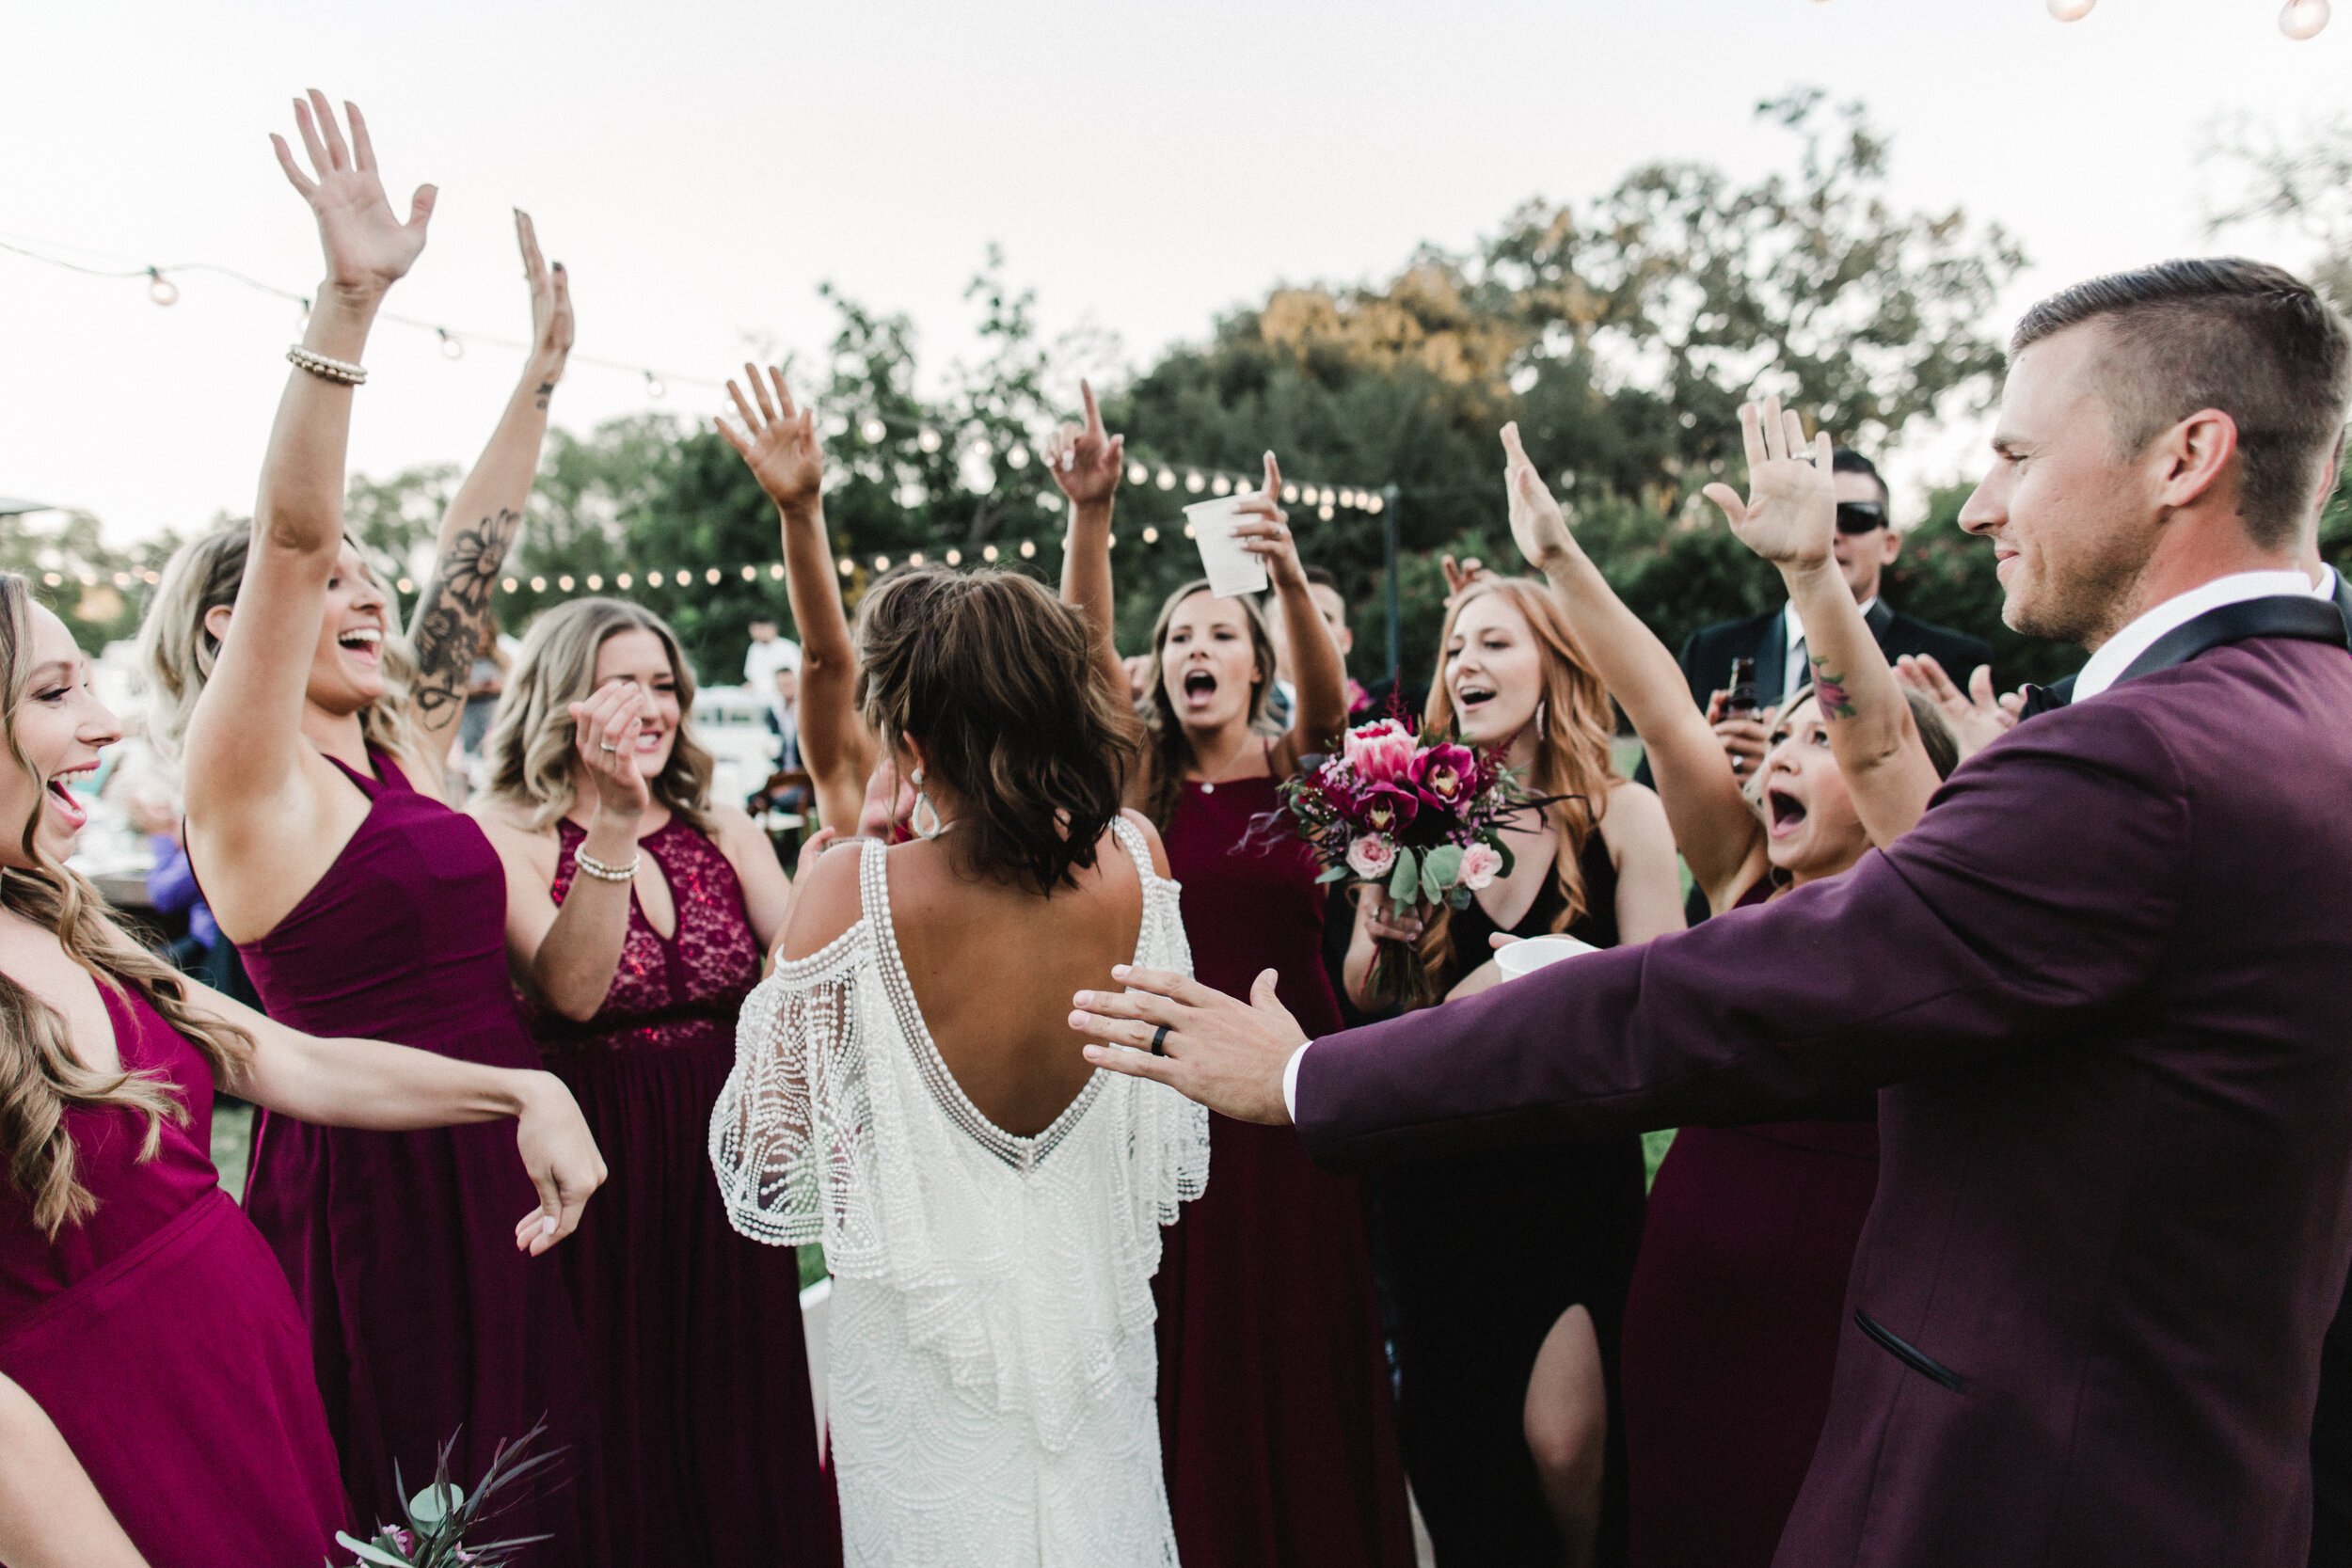 www.santabarbarawedding.com | Wunderland &amp; Co. | Rhianna Mercier Photography | Bride and Groom at Reception with Wine Colored Bridesmaid Dresses and Suits